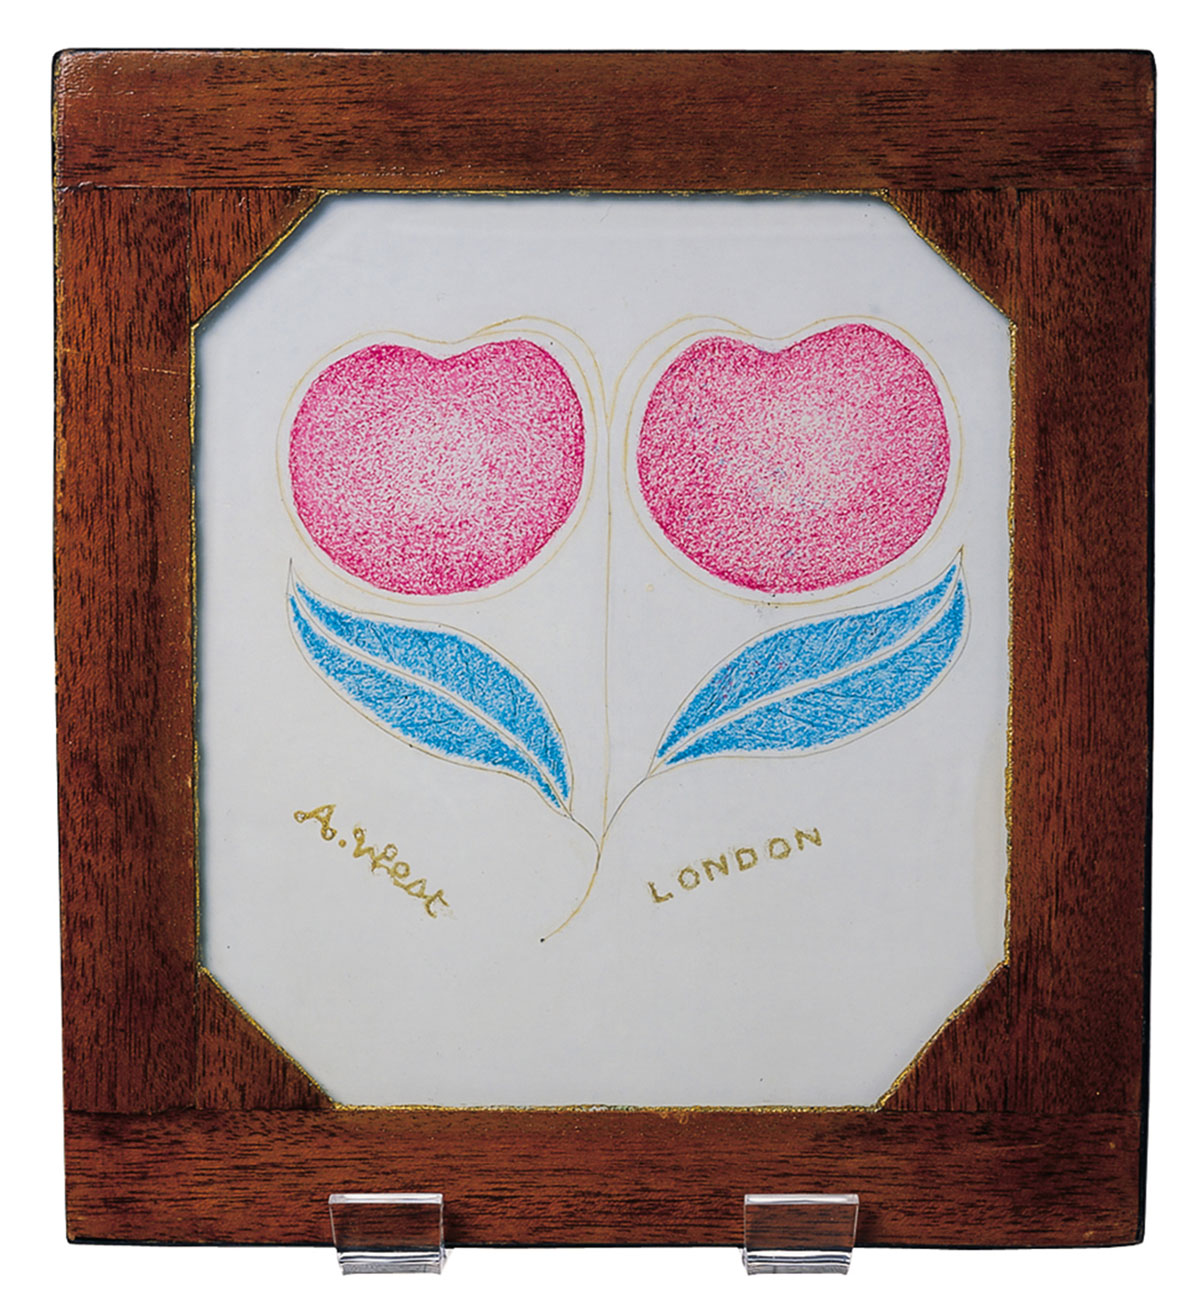 An undated artwork by Alfie West titled “Twin Roses with My Hair One Hair.” Verso text reads: “13 split parts and 2 ace of diamonds.”